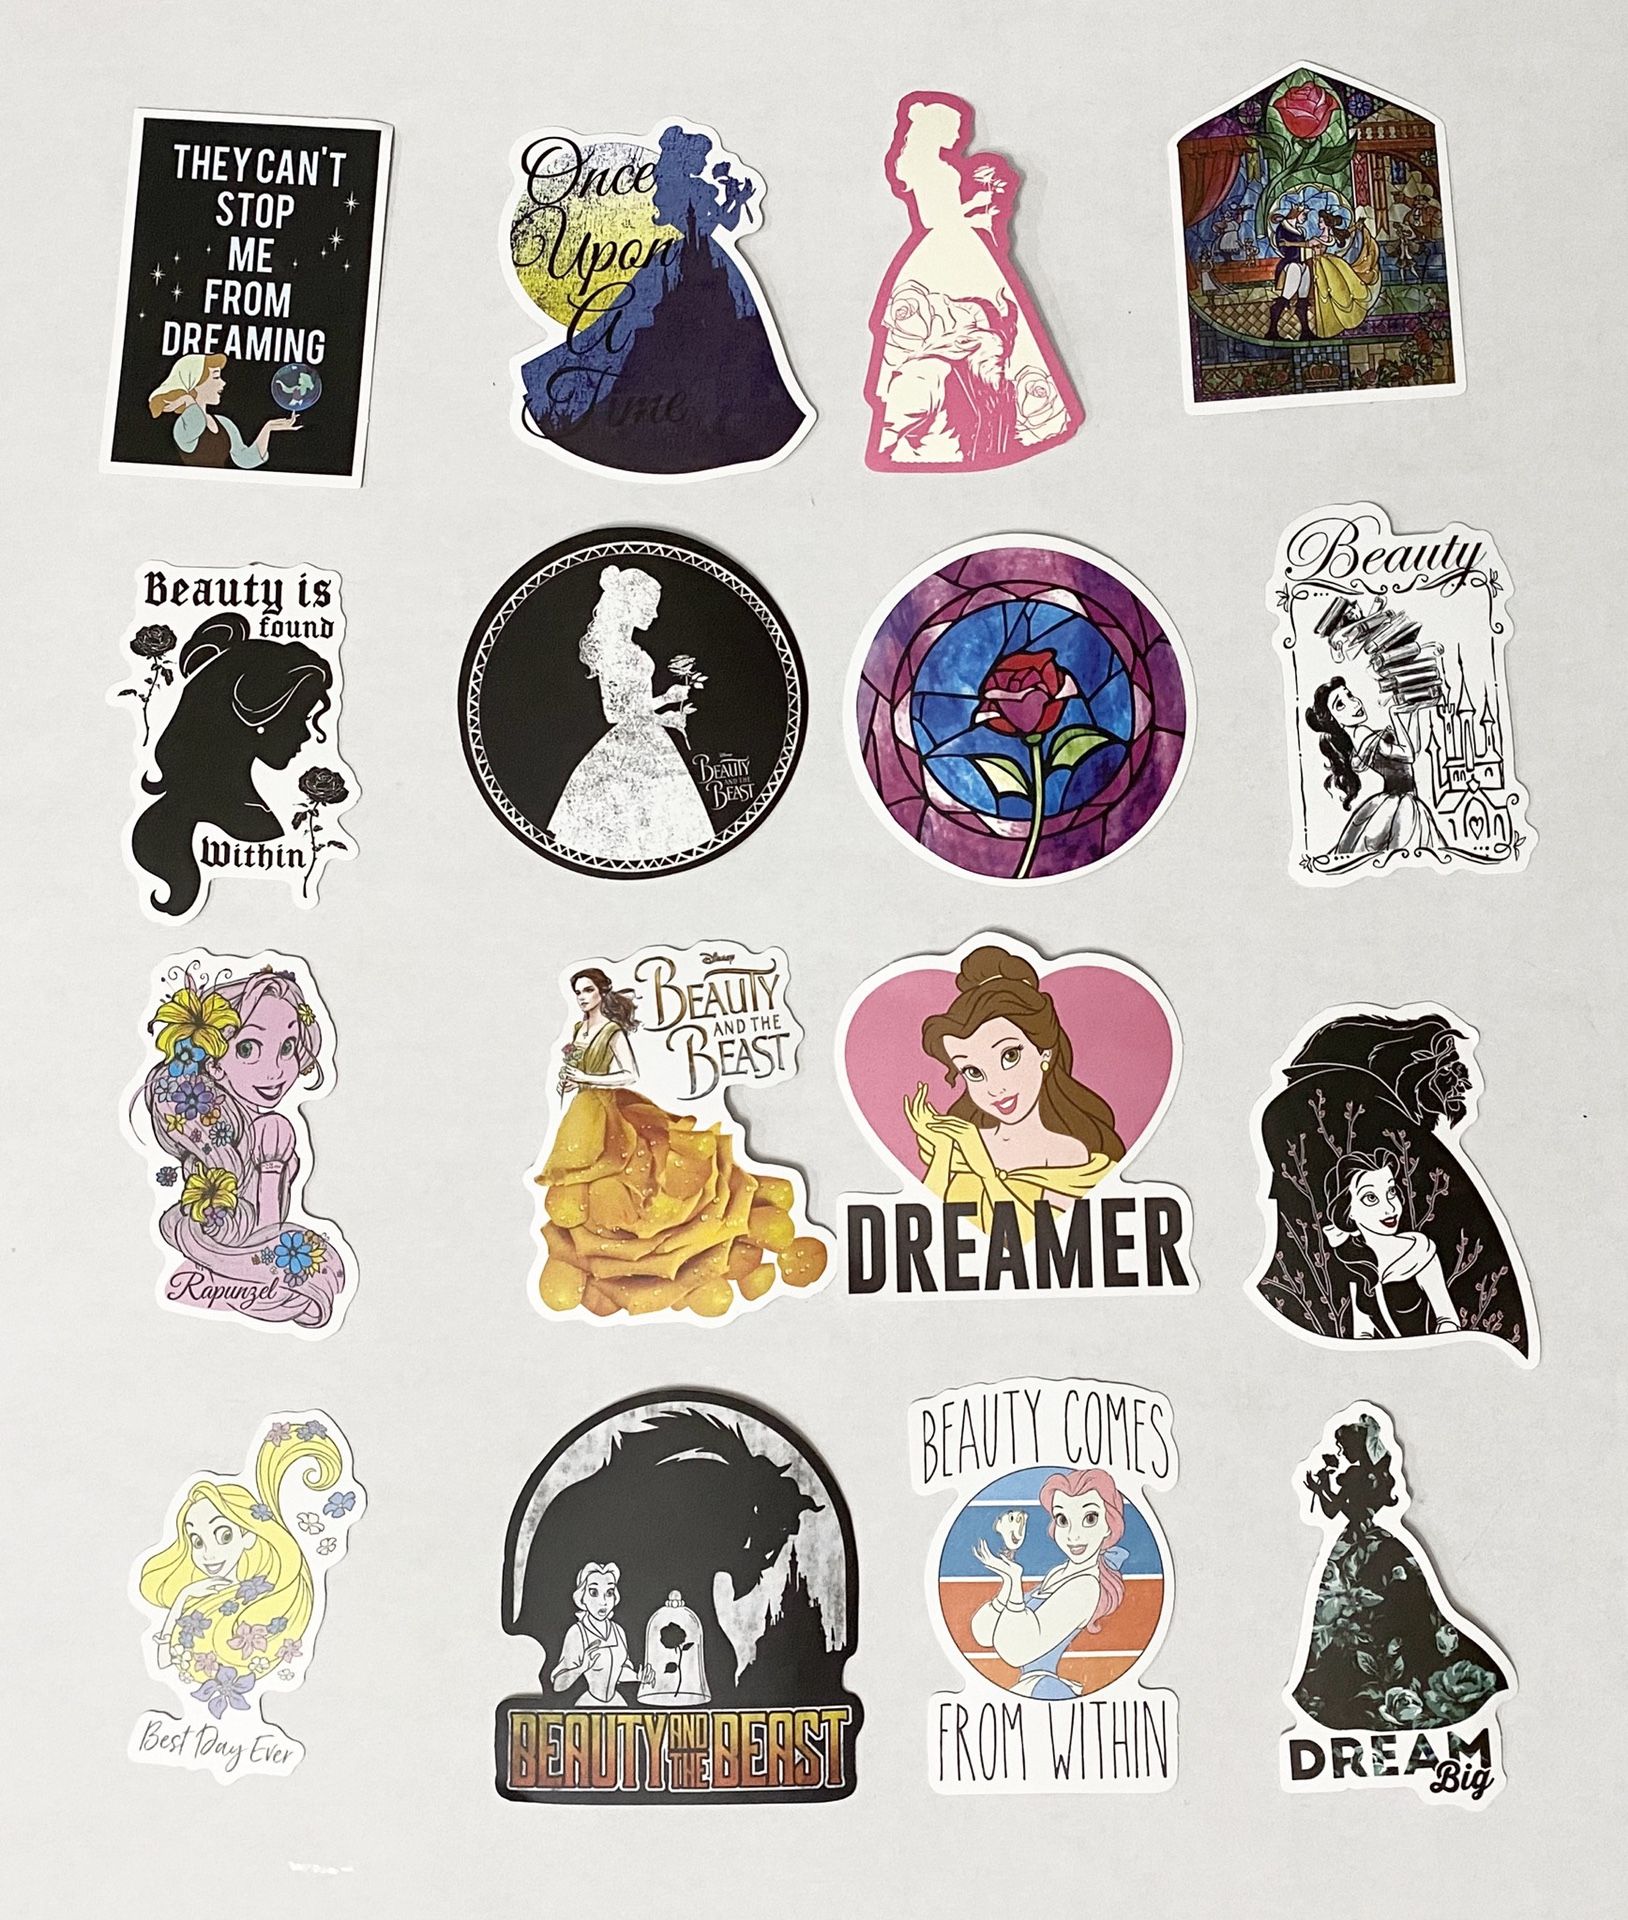 Disney Princess Belle Hydroflask stickers any 6 for $5